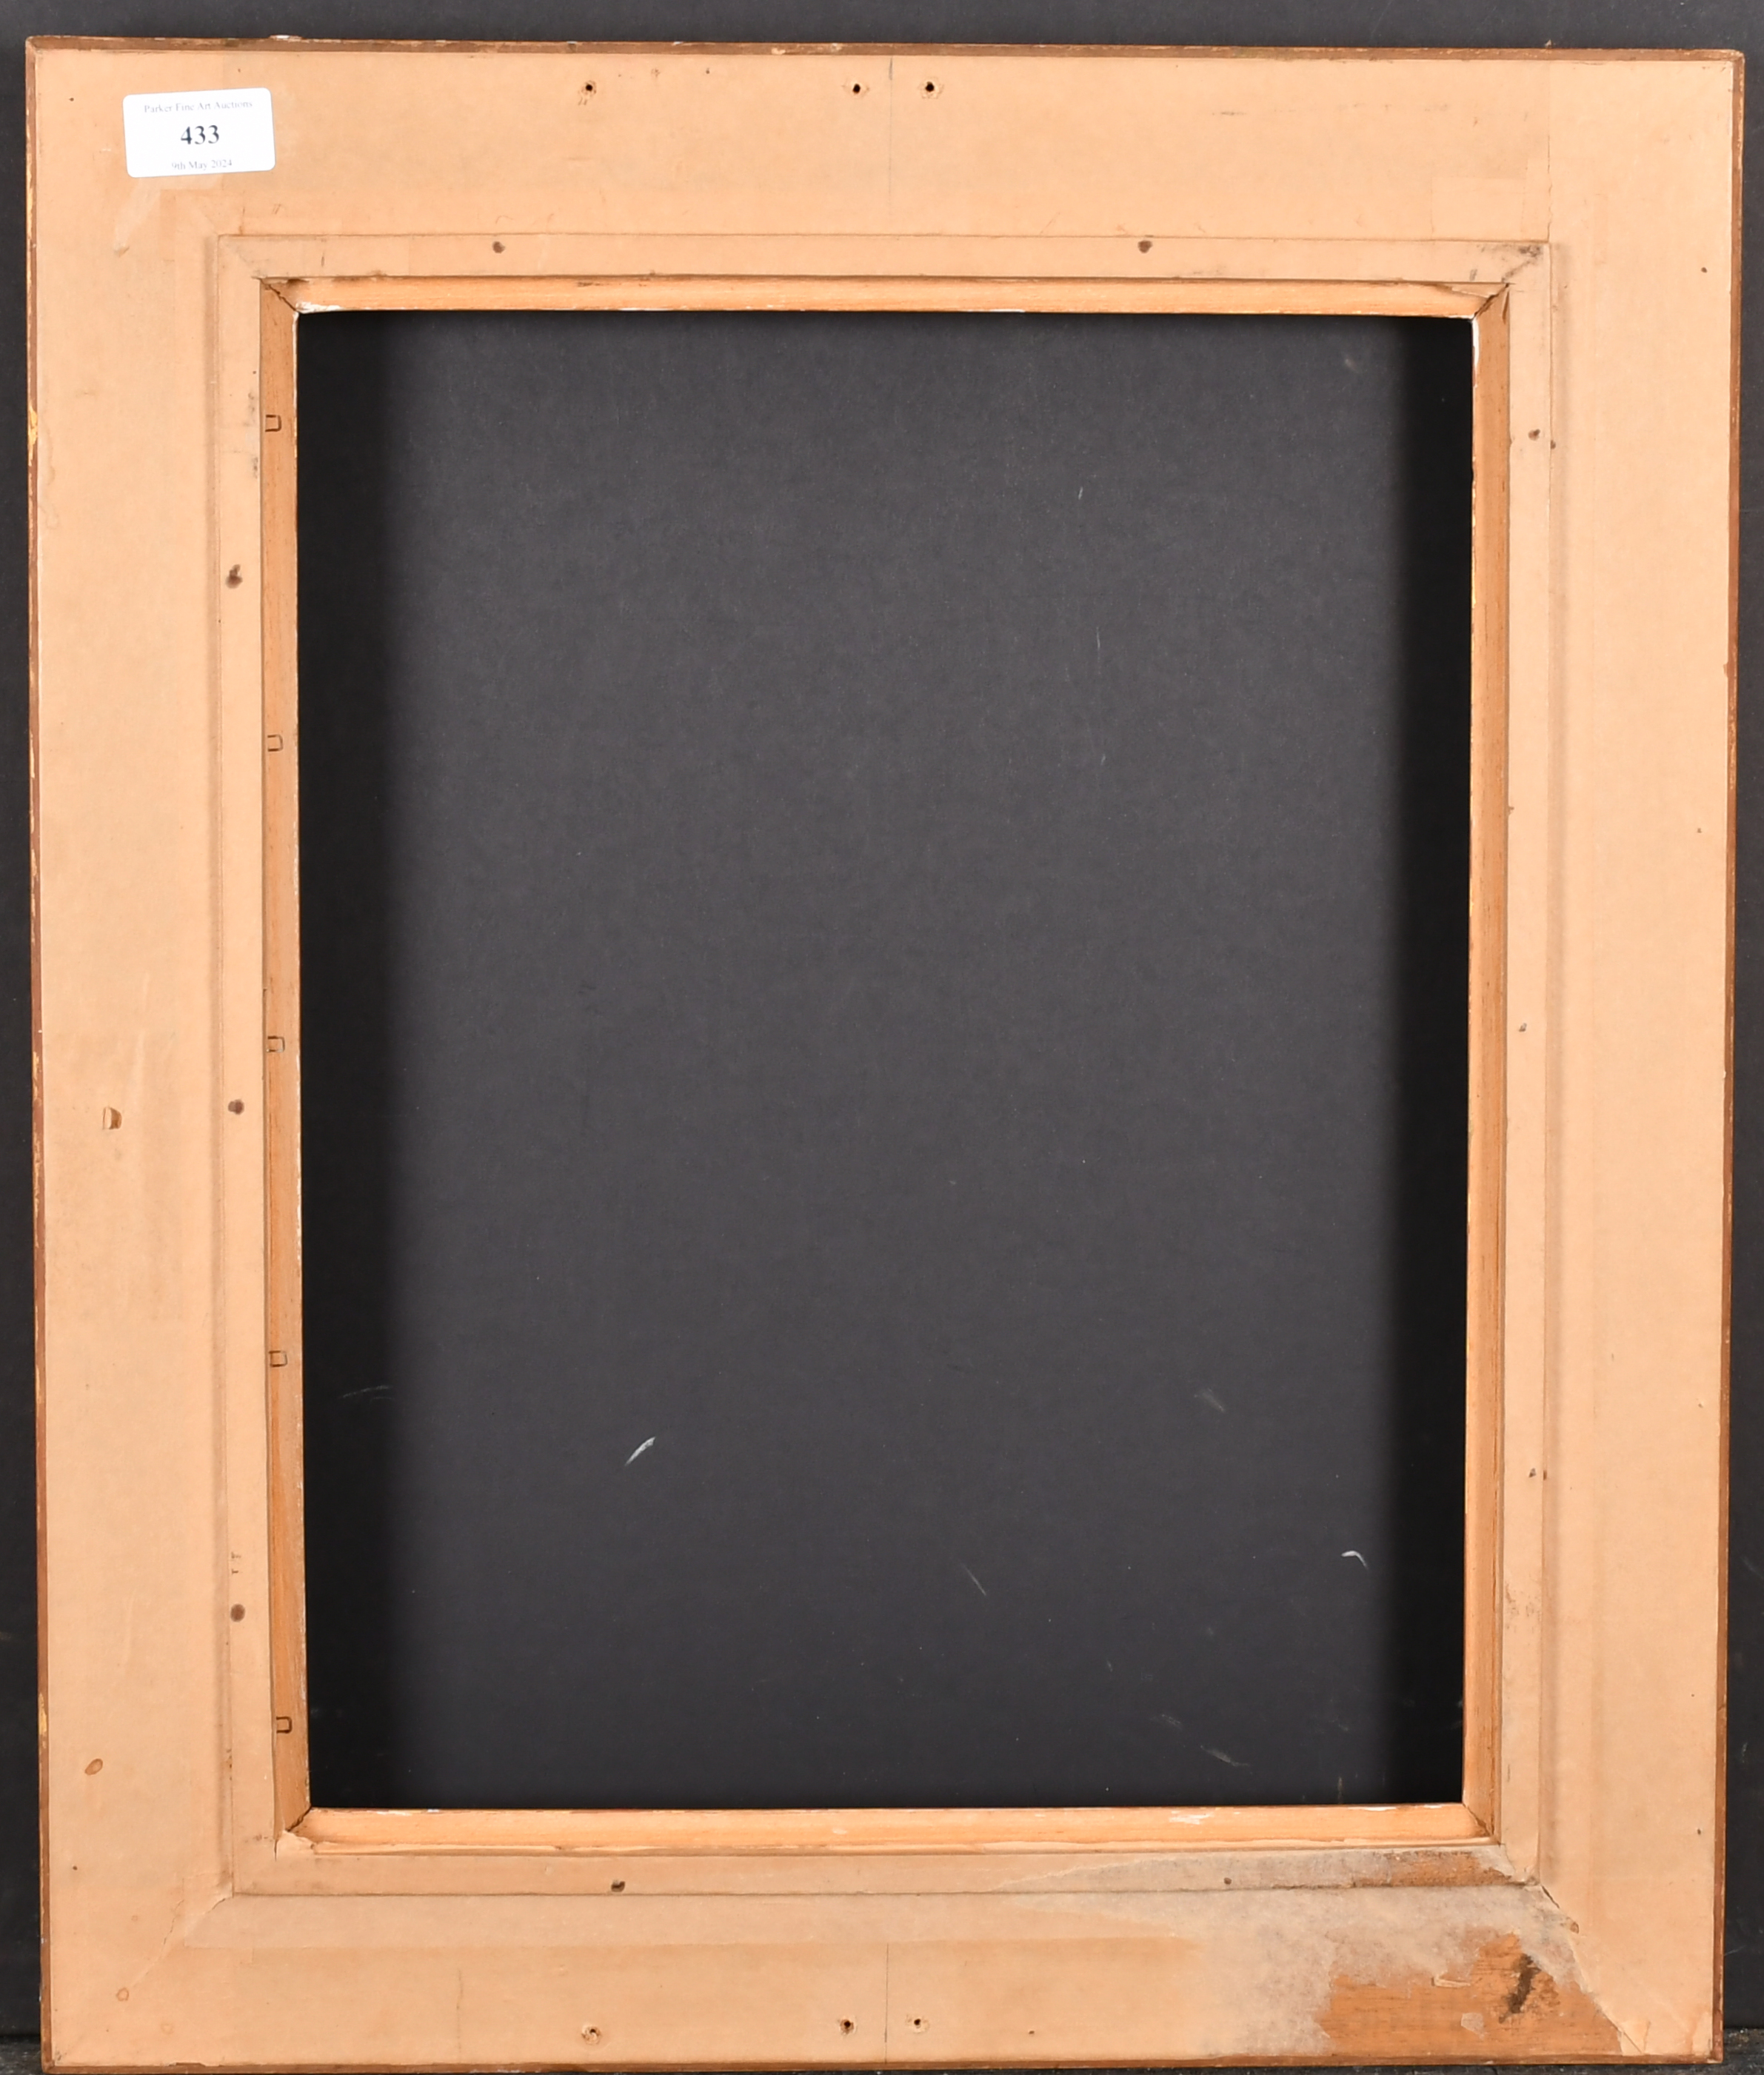 20th Century English School. A Gilt and Painted Frame, rebate 16" x 12.75" (40.6 x 32.4cm) - Image 3 of 3